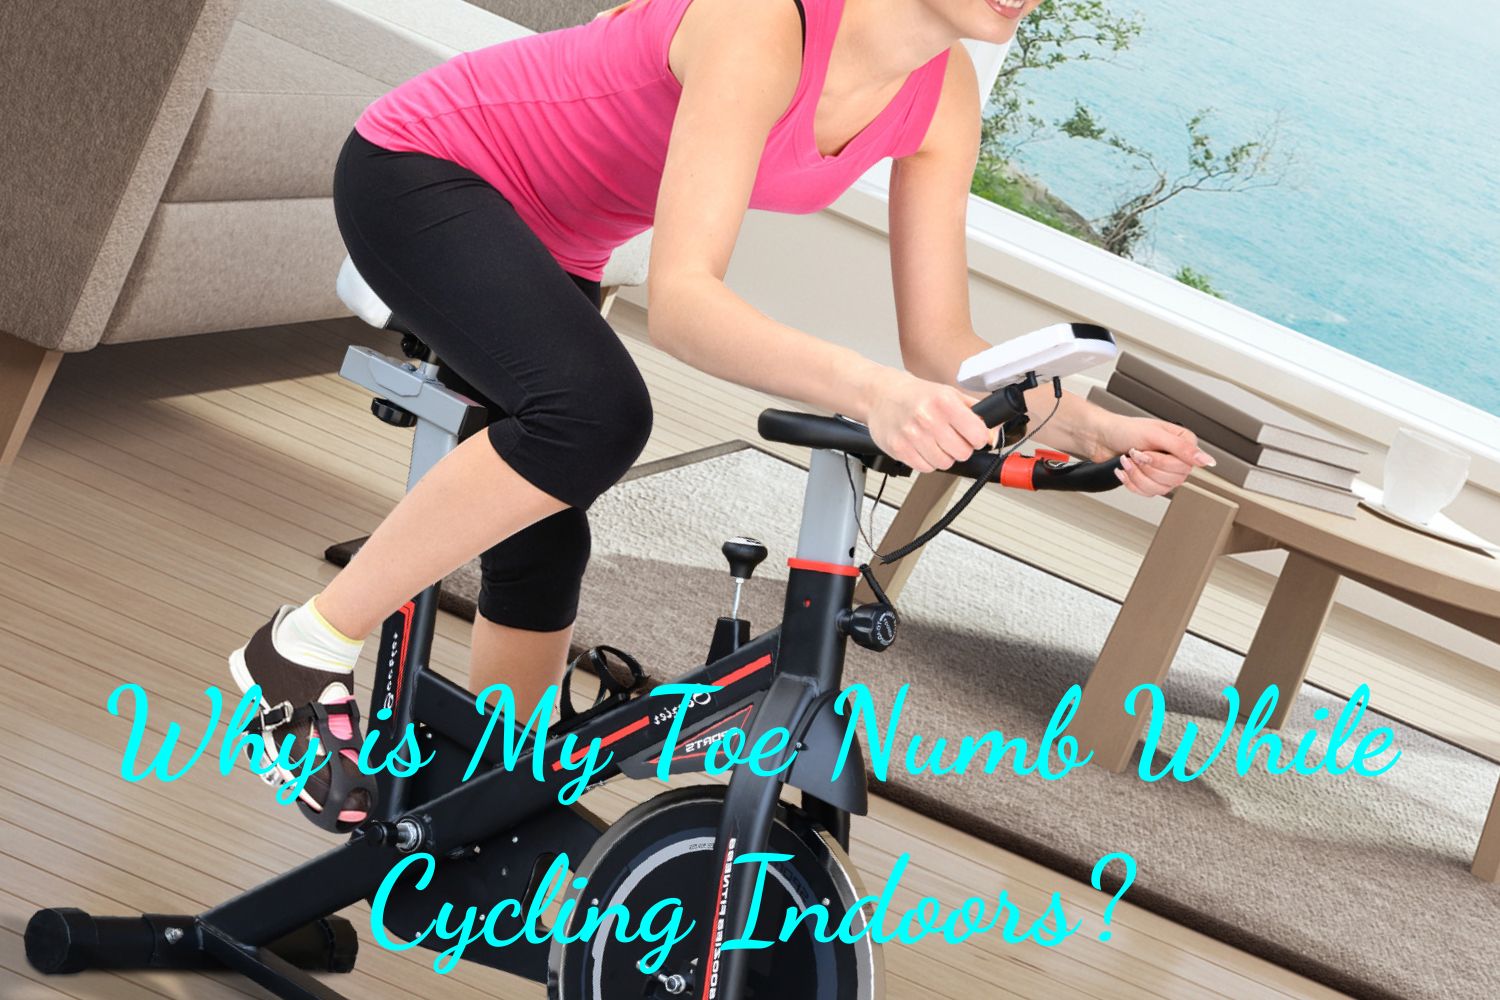 Why is My Toe Numb While Cycling Indoors?